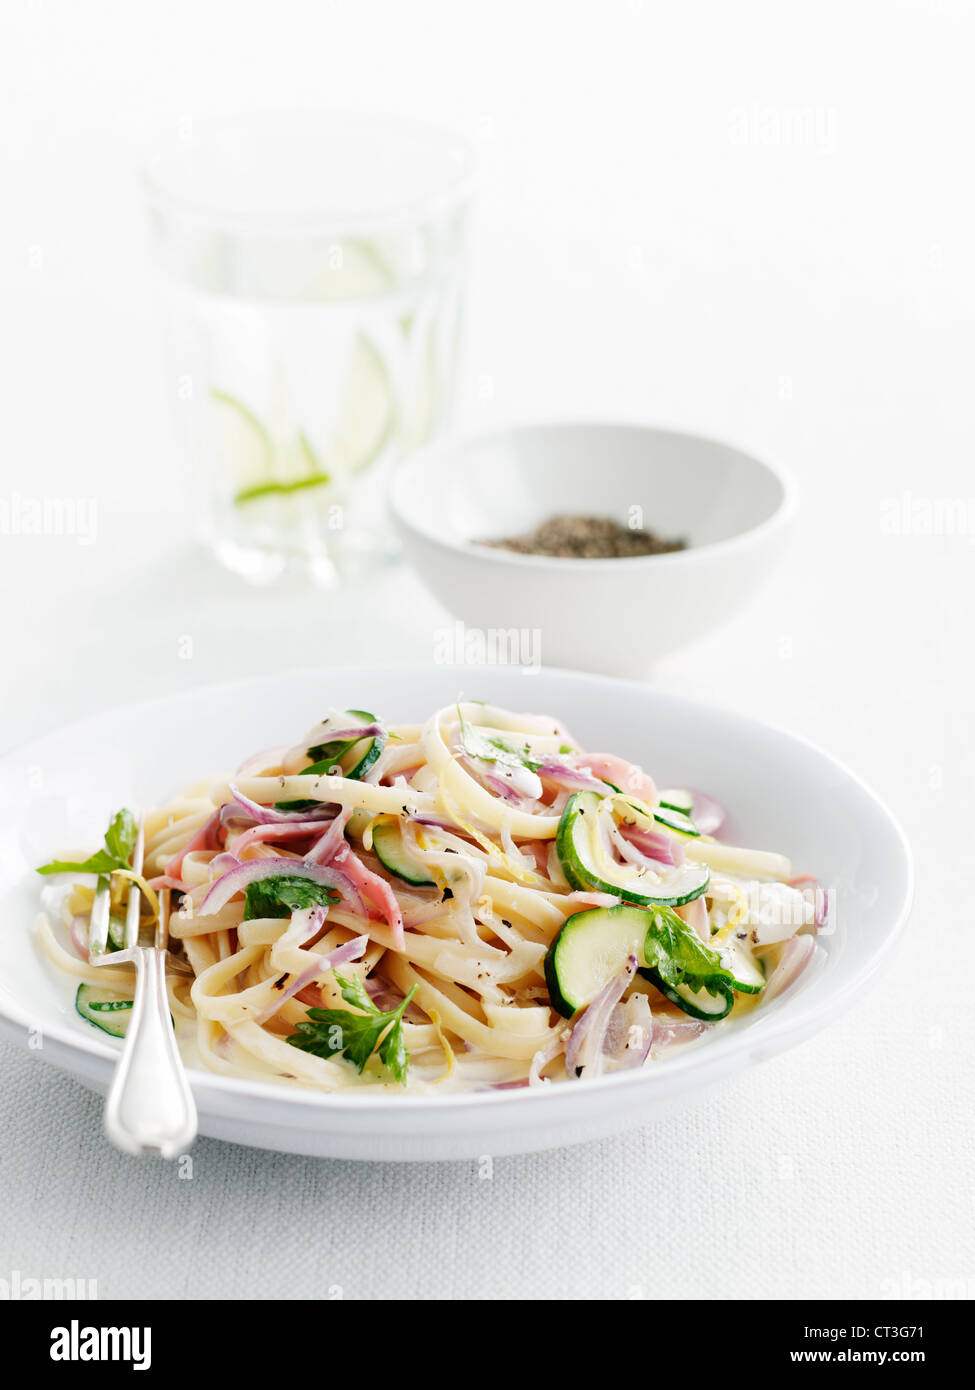 Plate of pasta and vegetables Stock Photo